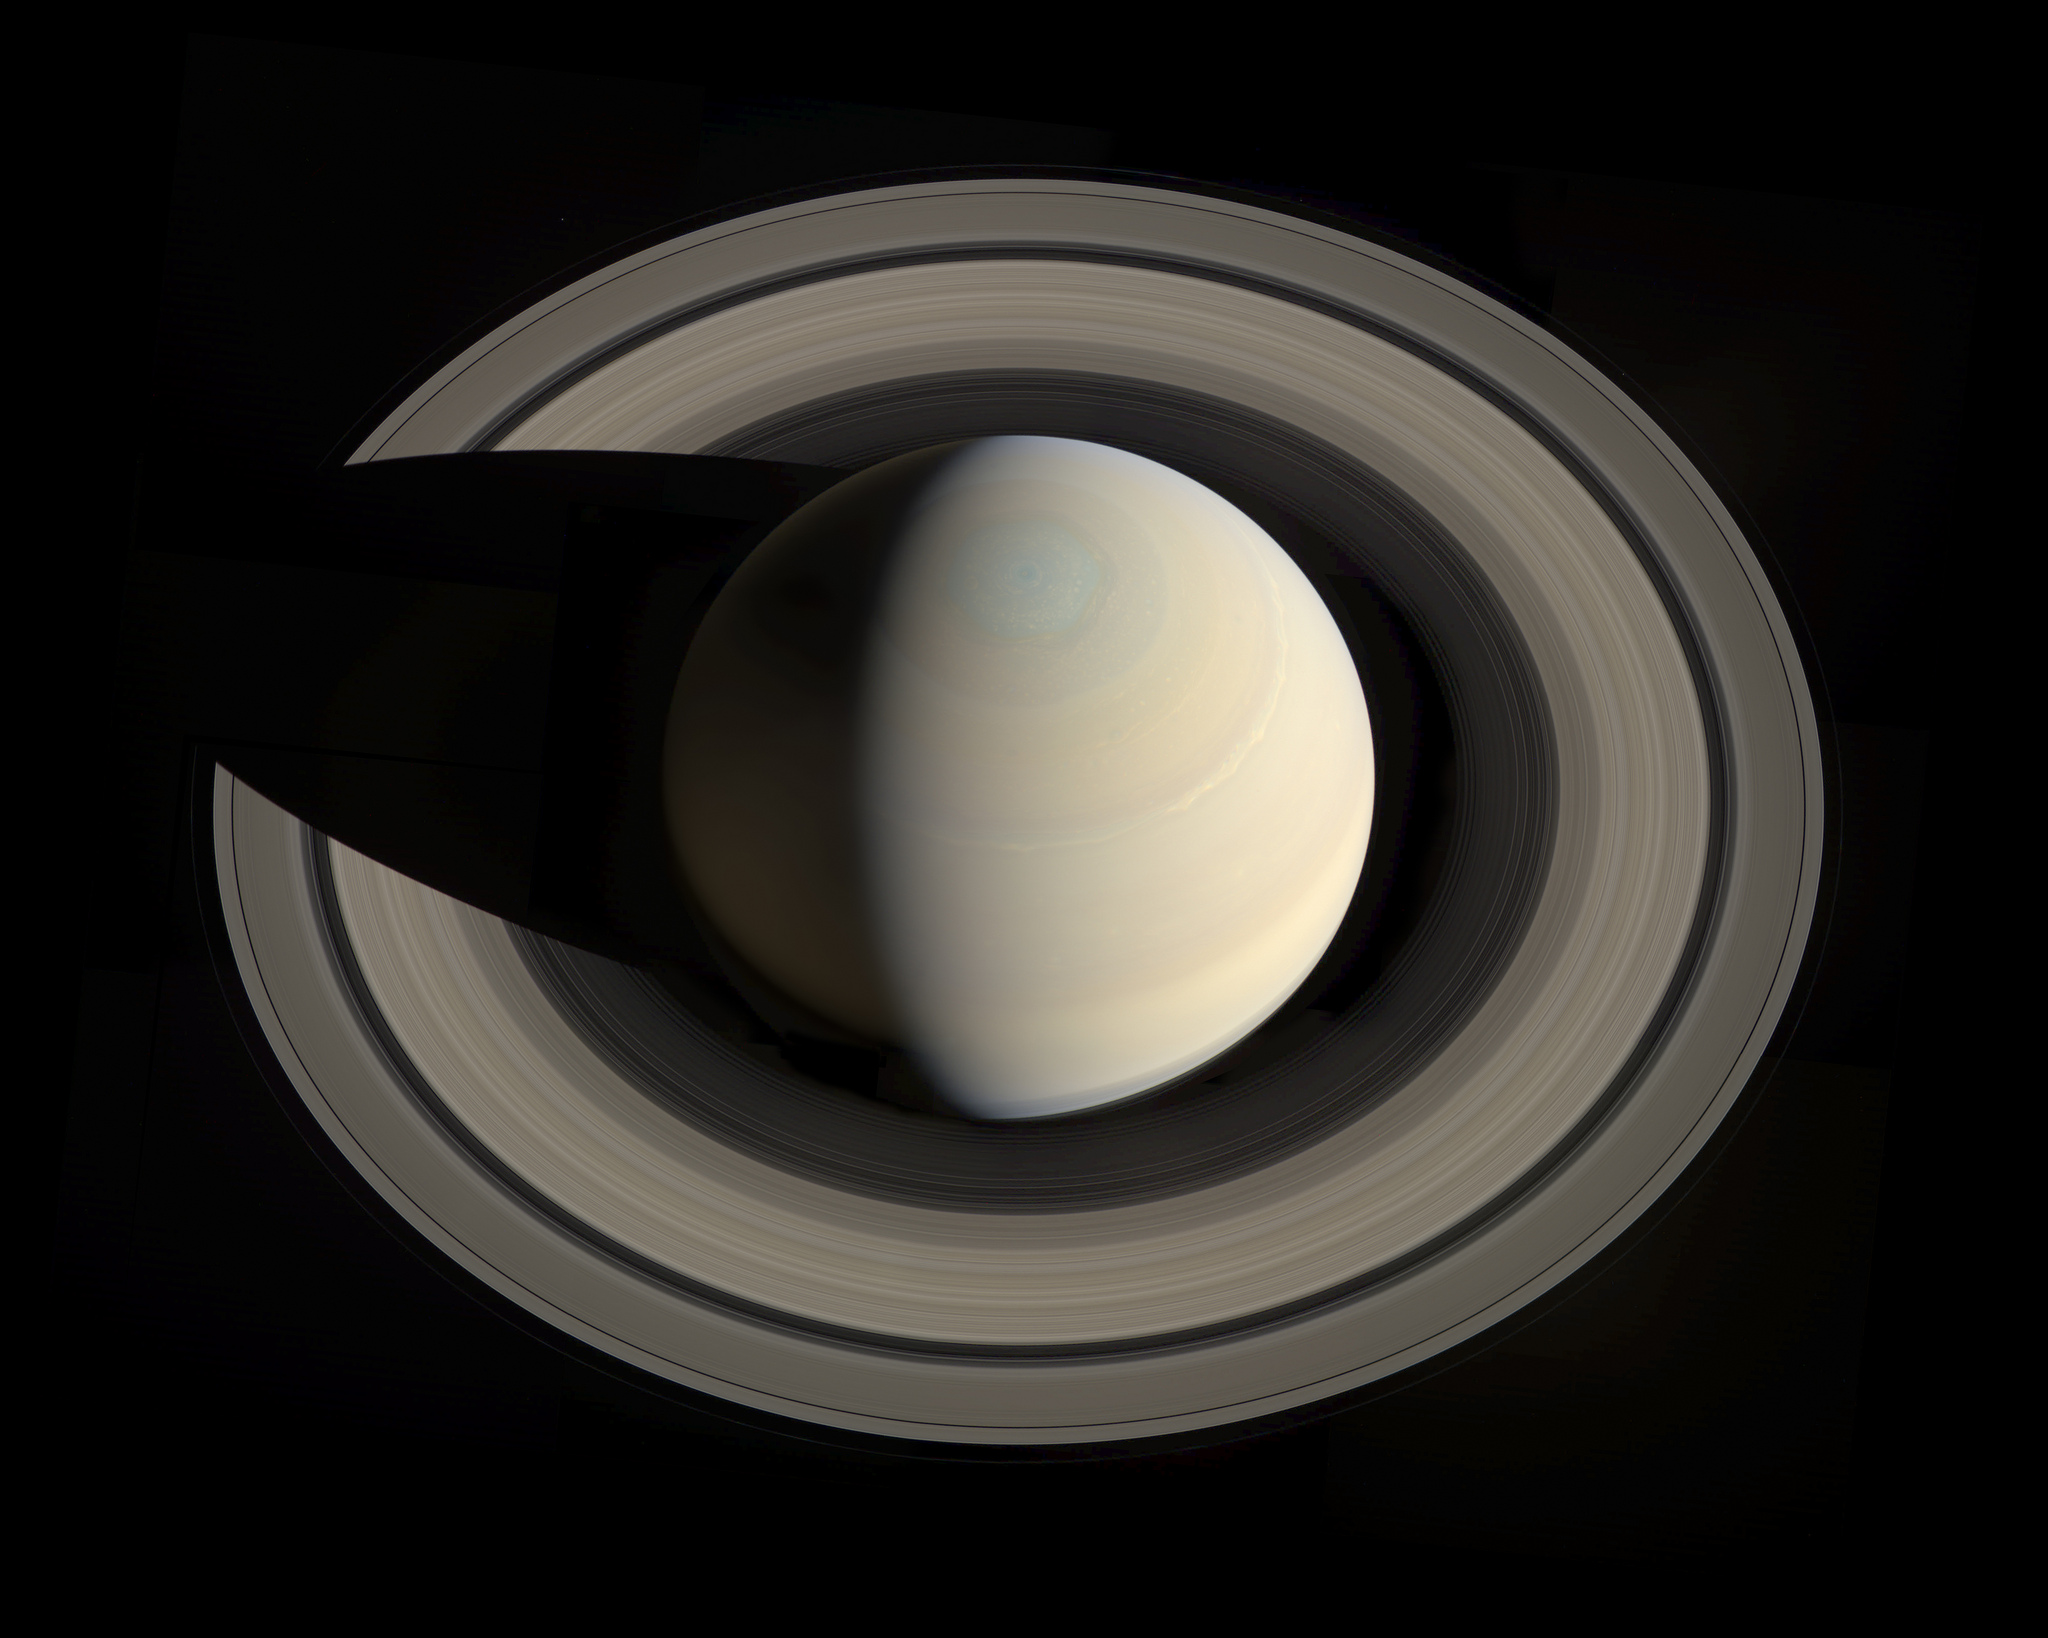 General 2048x1638 astronomy Saturn planetary rings planet Solar System